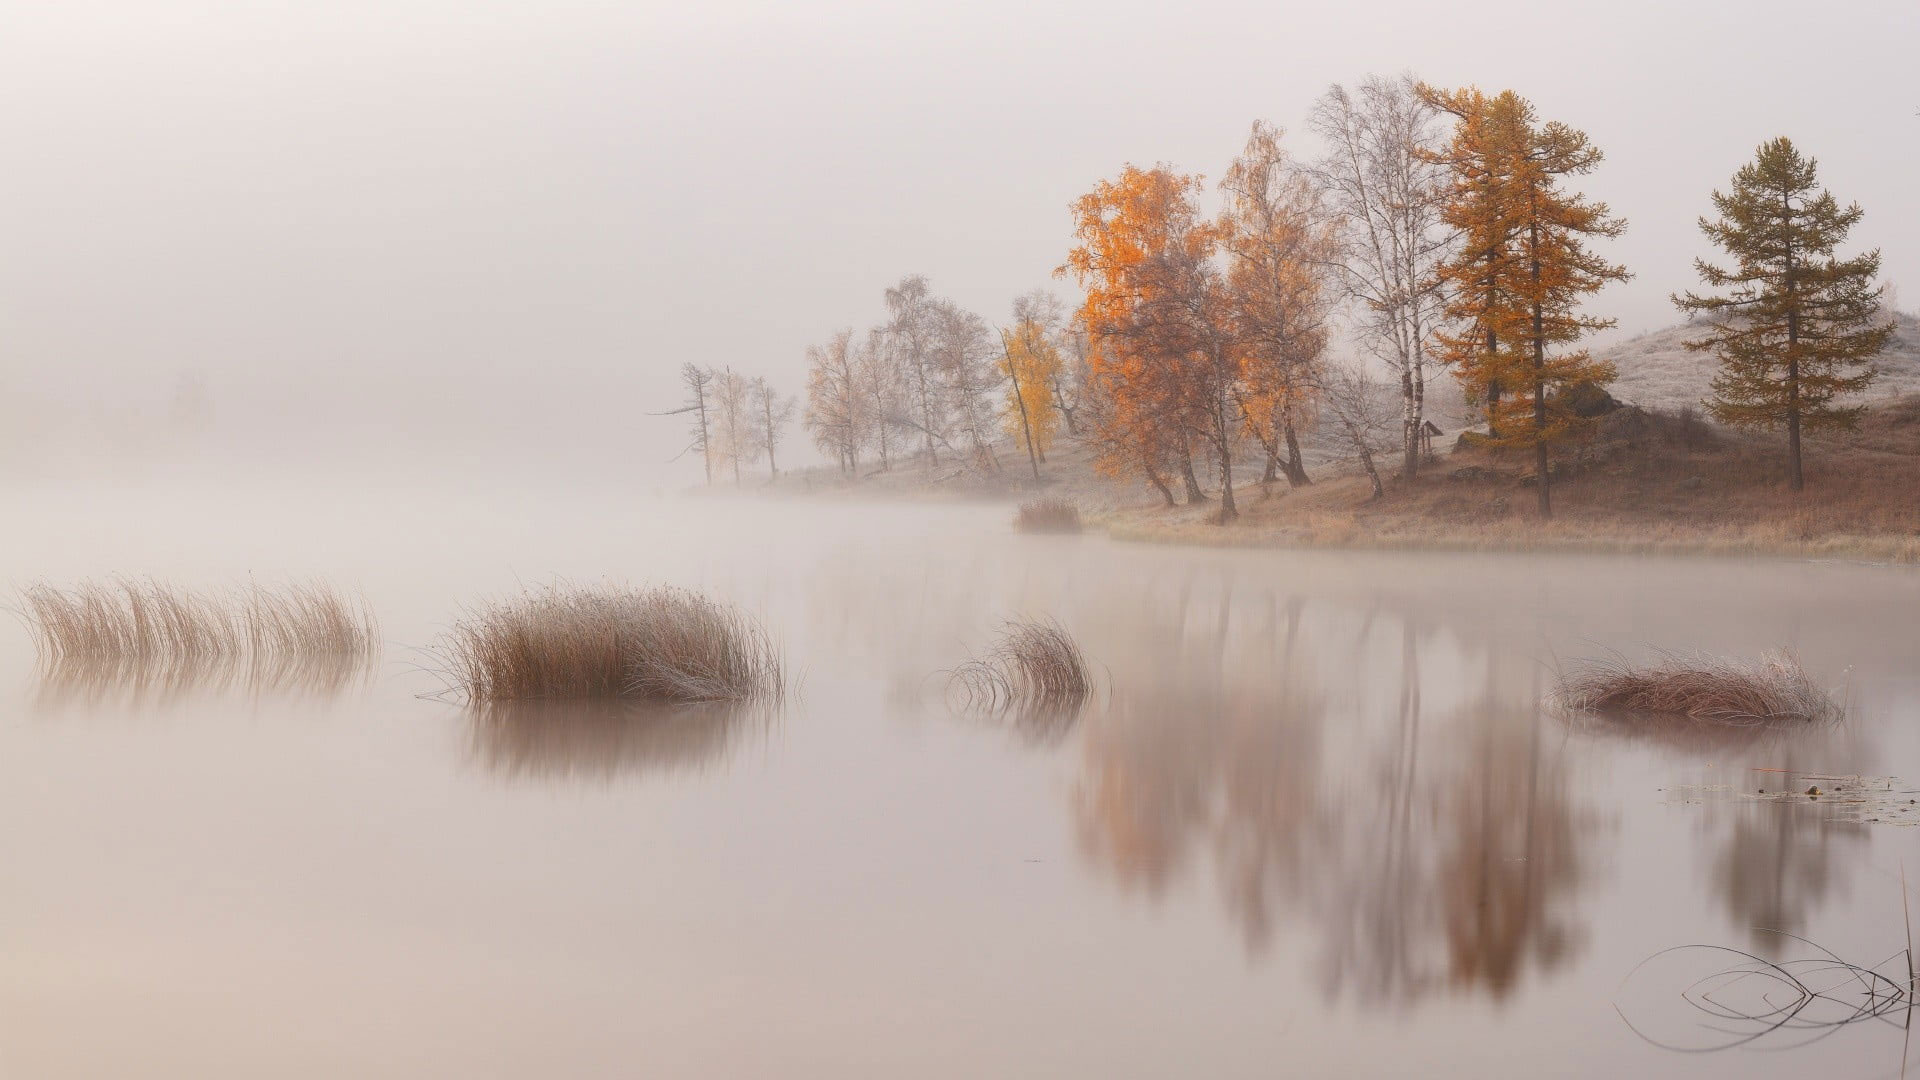 Body of water beside trees, nature, landscape, lake, mist, morning